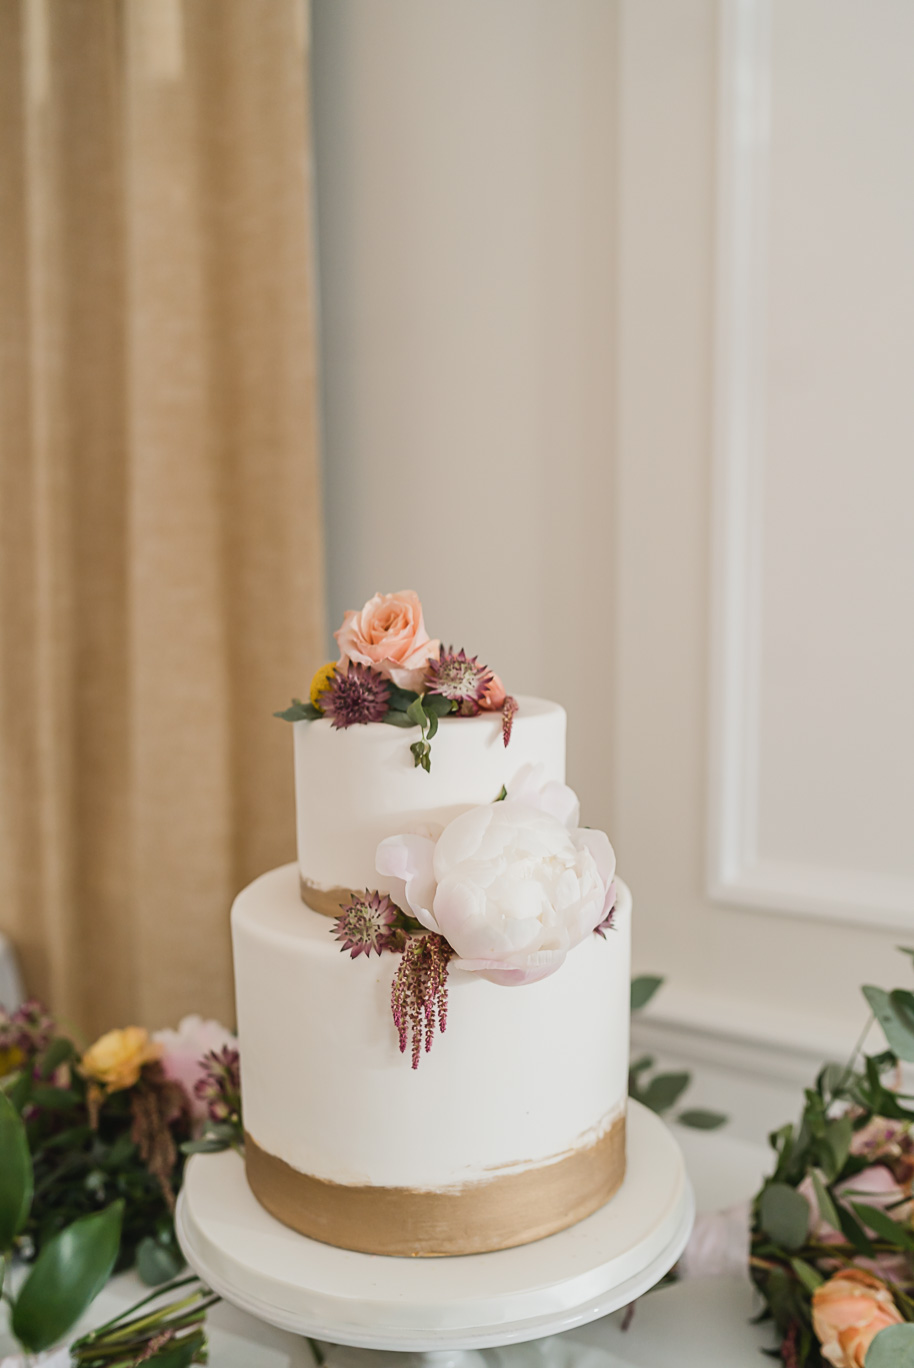 Two layer cream and gold wedding day cake with peonies. An intimate destination Mackinac Island wedding at Mission Point Resort with a cranberry and black color palette provided by Kari Dawson, top-rated Northern Michigan wedding photographer, and her team.